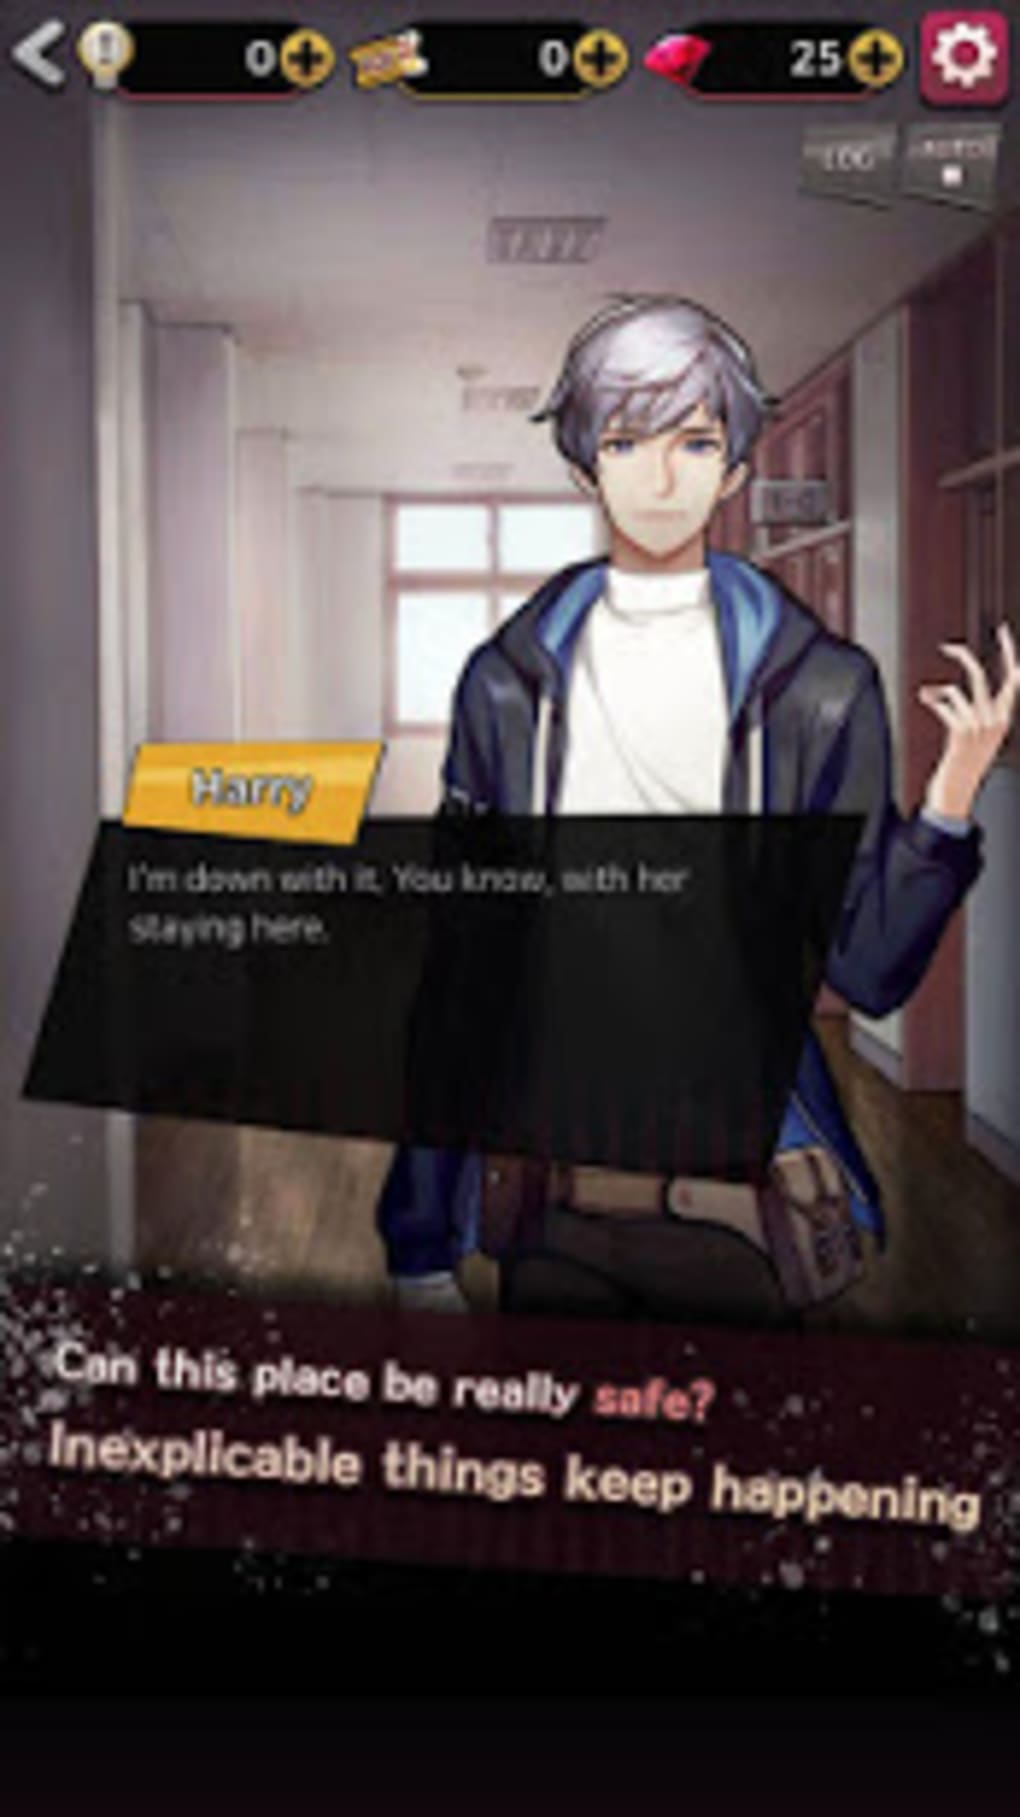 Download & Play Dangerous Fellows: Otome Game on PC & Mac